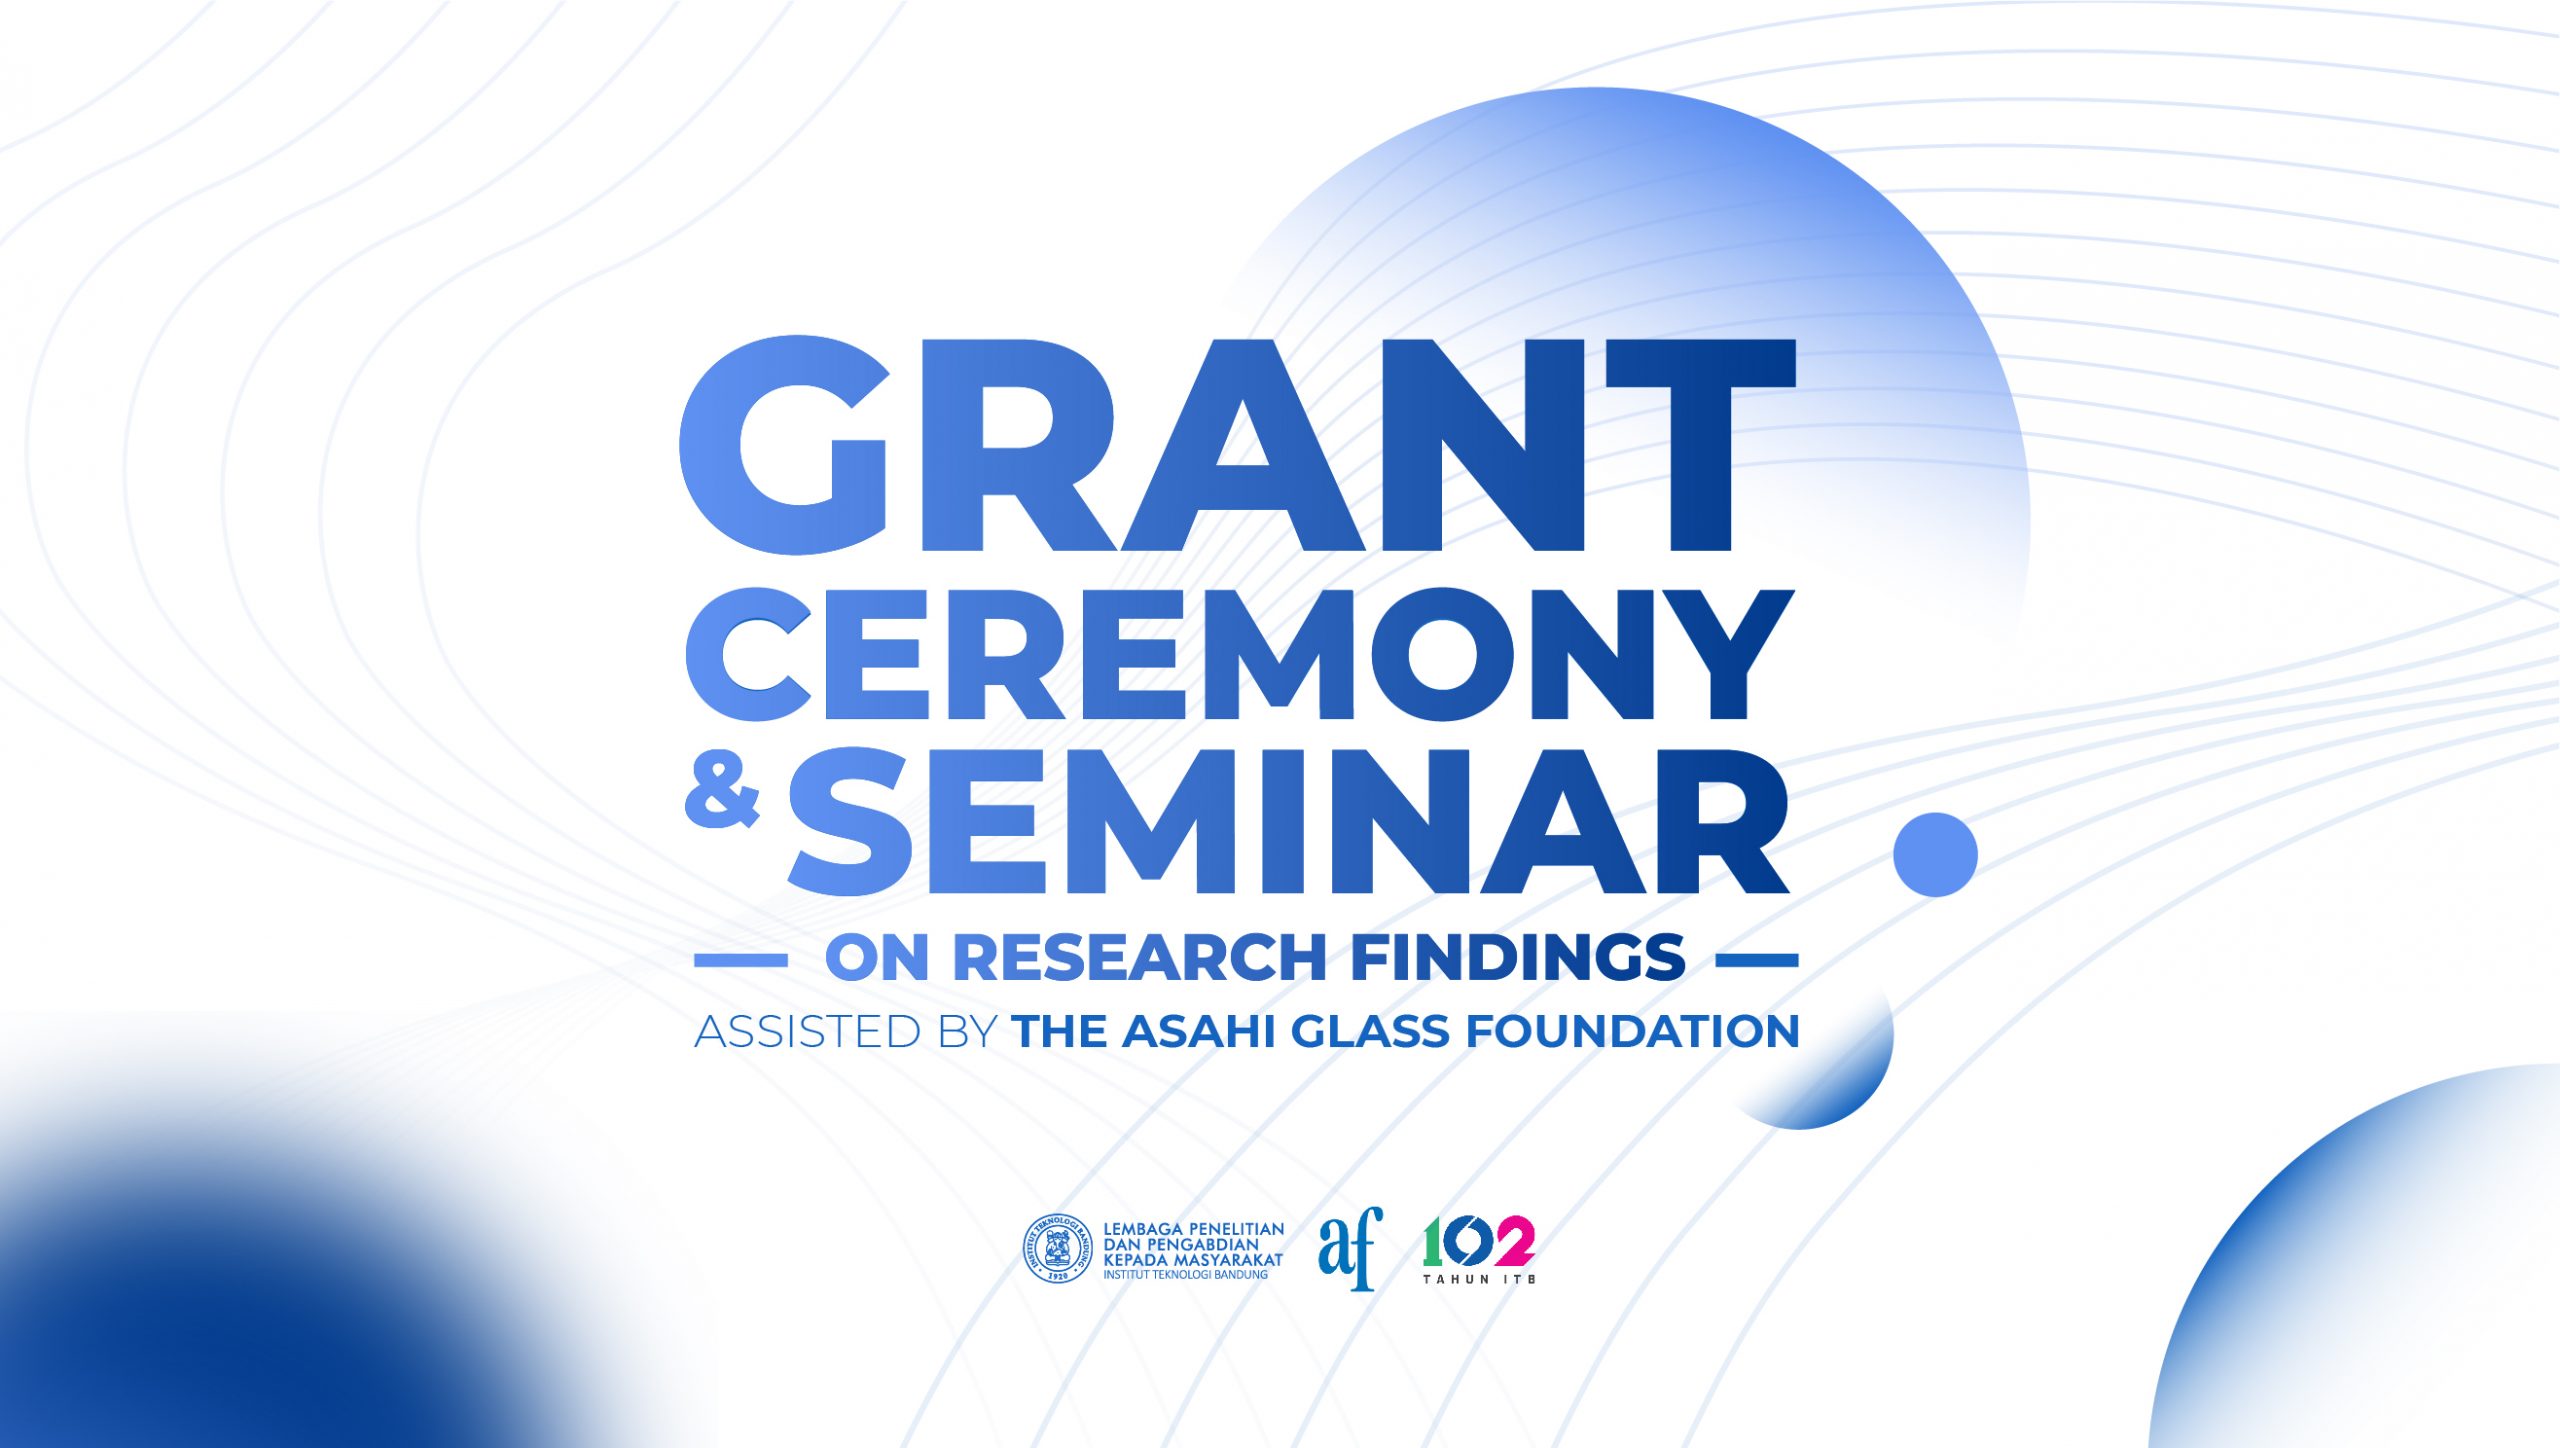 Grant Ceremony & Seminar on Research Findings Assisted by The Asahi Glass Foundation 2022